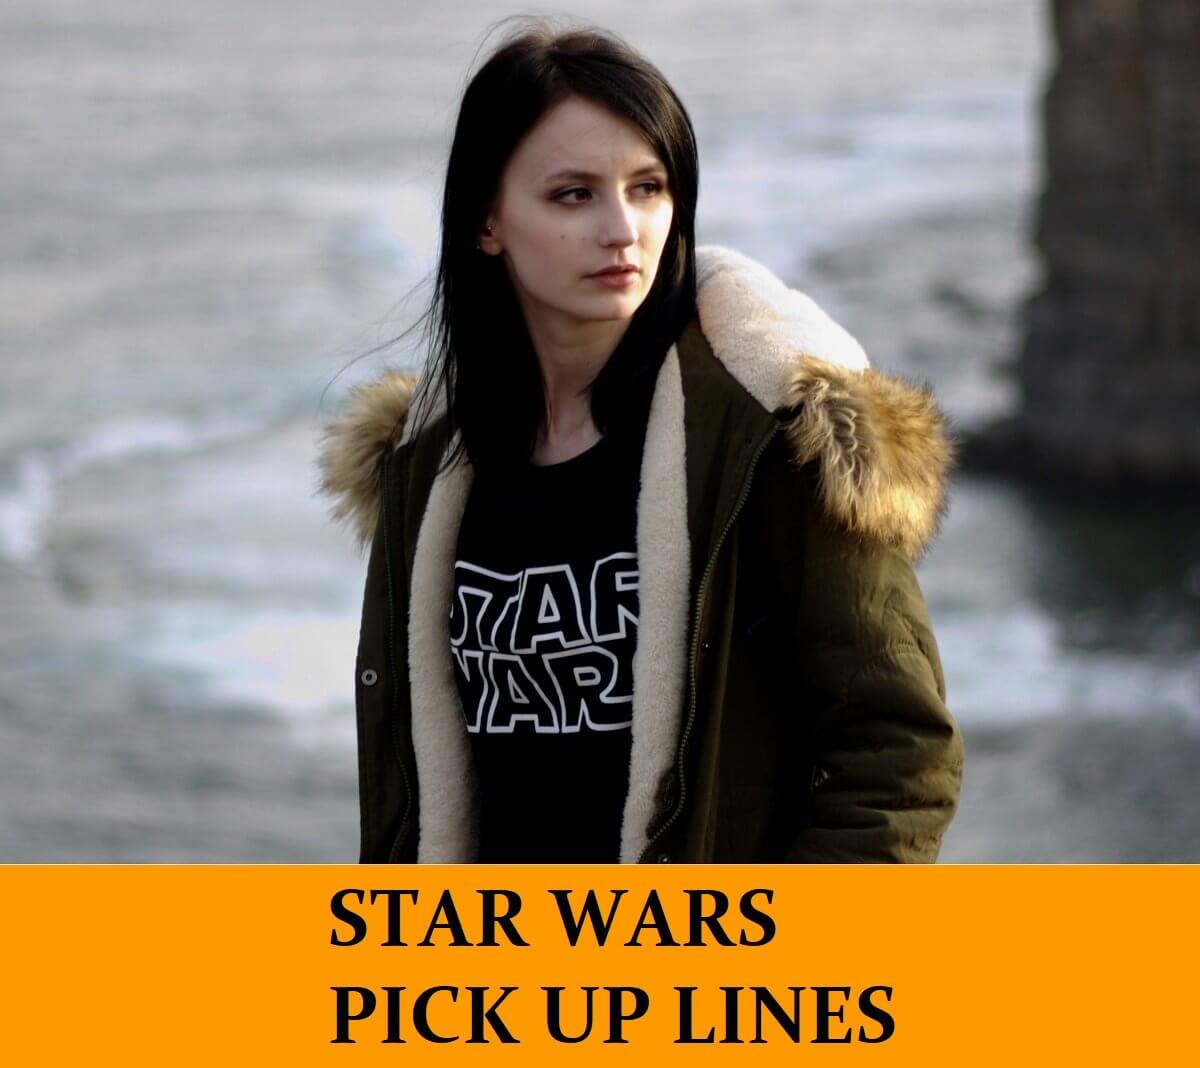 69 Star Wars Pick Up Lines [Funny, Dirty, Cheesy]